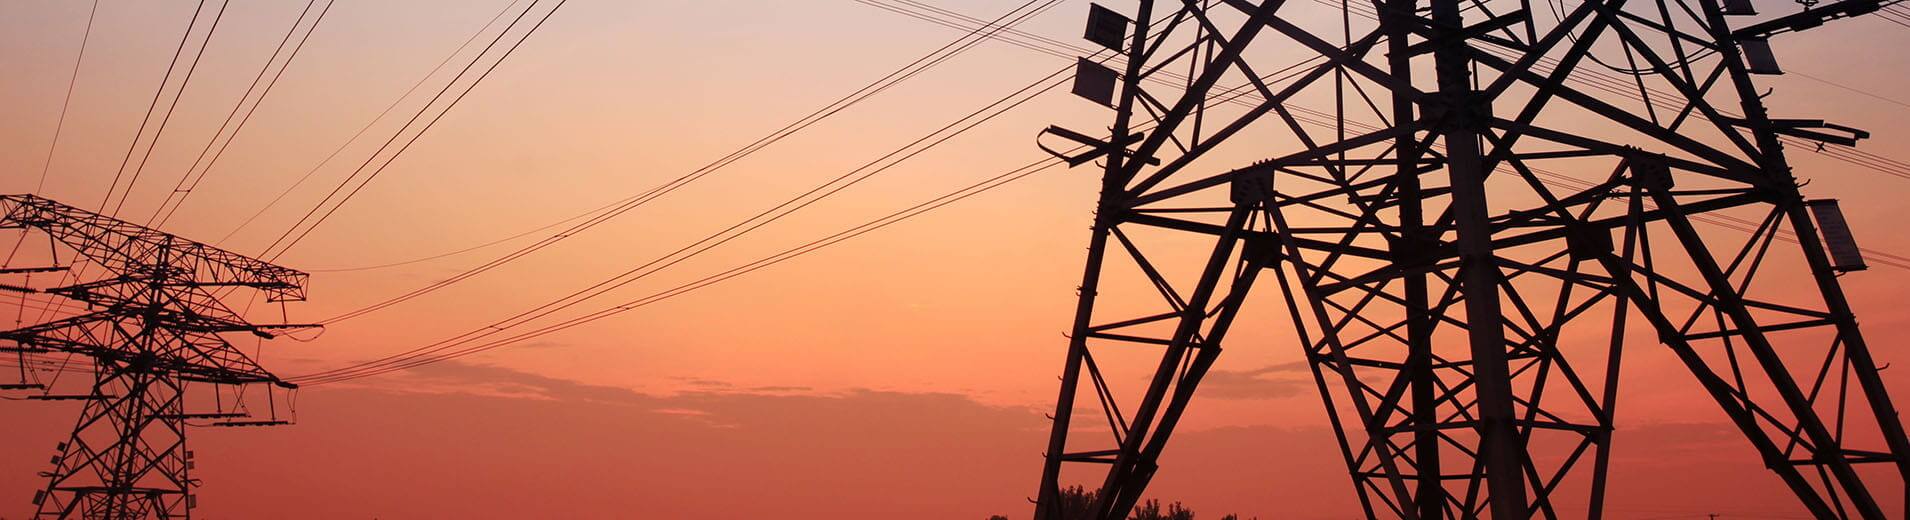 High_Voltage_Towers_At_Sunset_S_2305